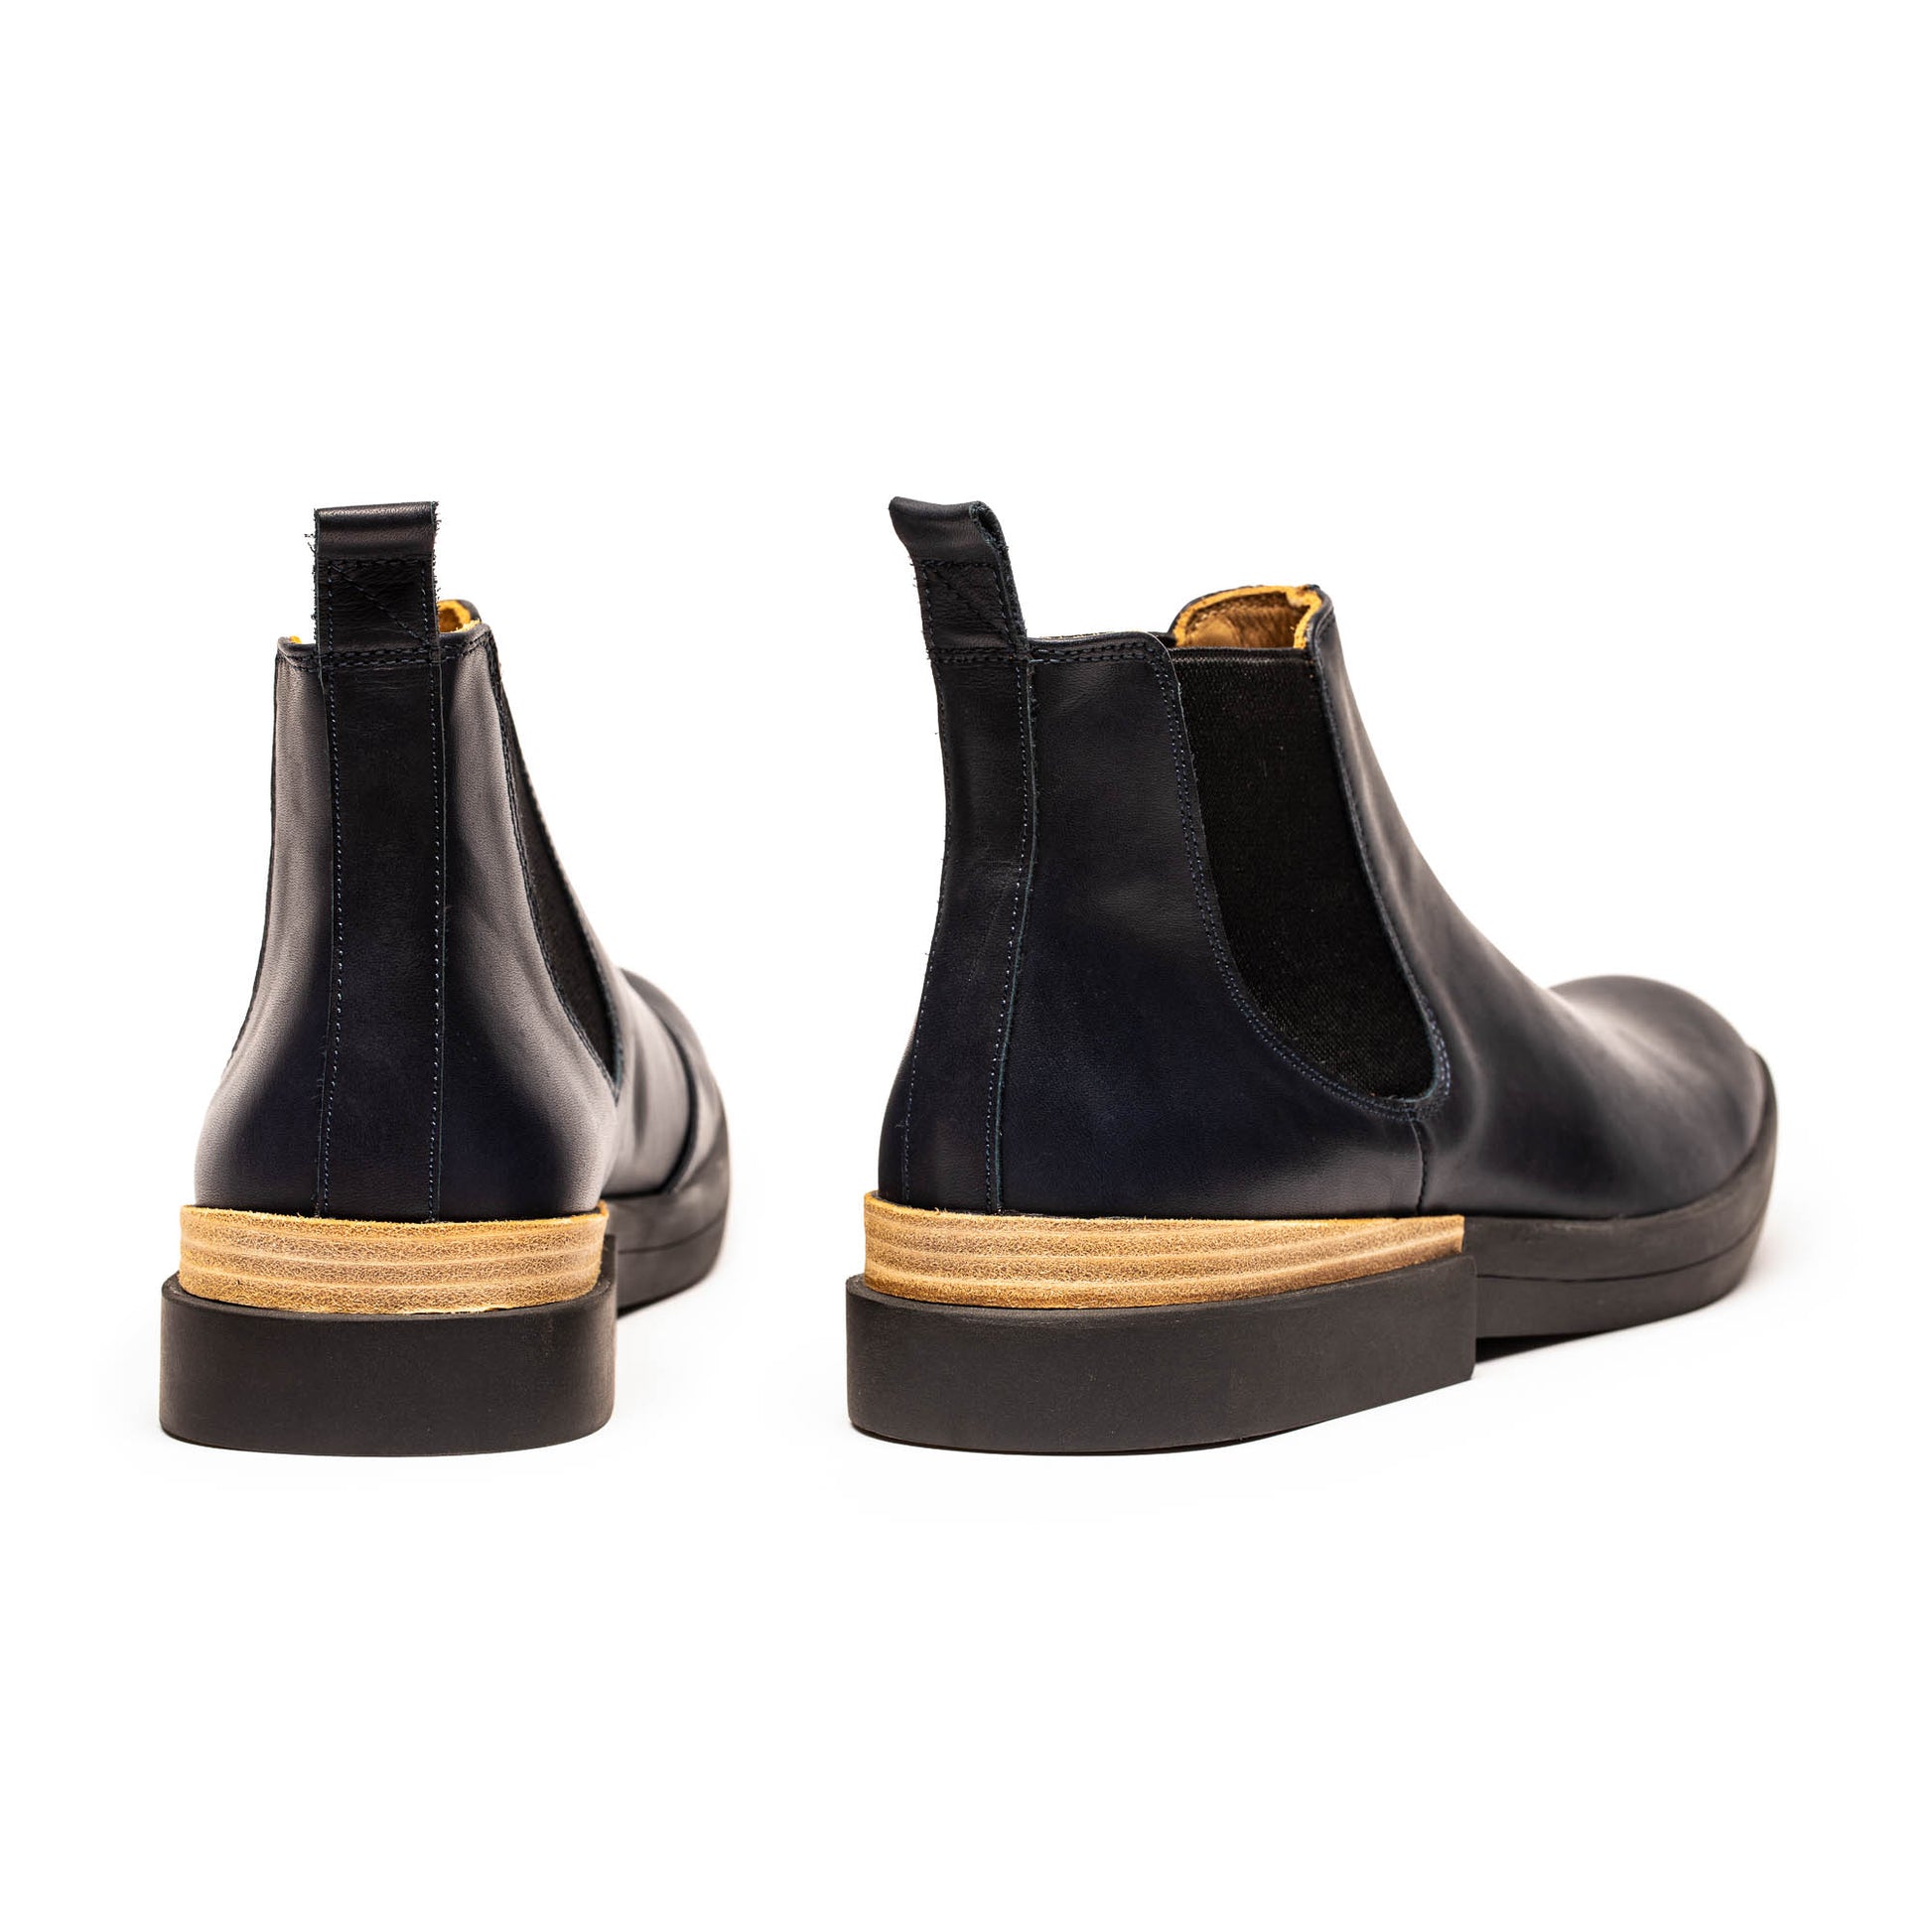 navy women's leather chelsea boot by designer tracey neuls